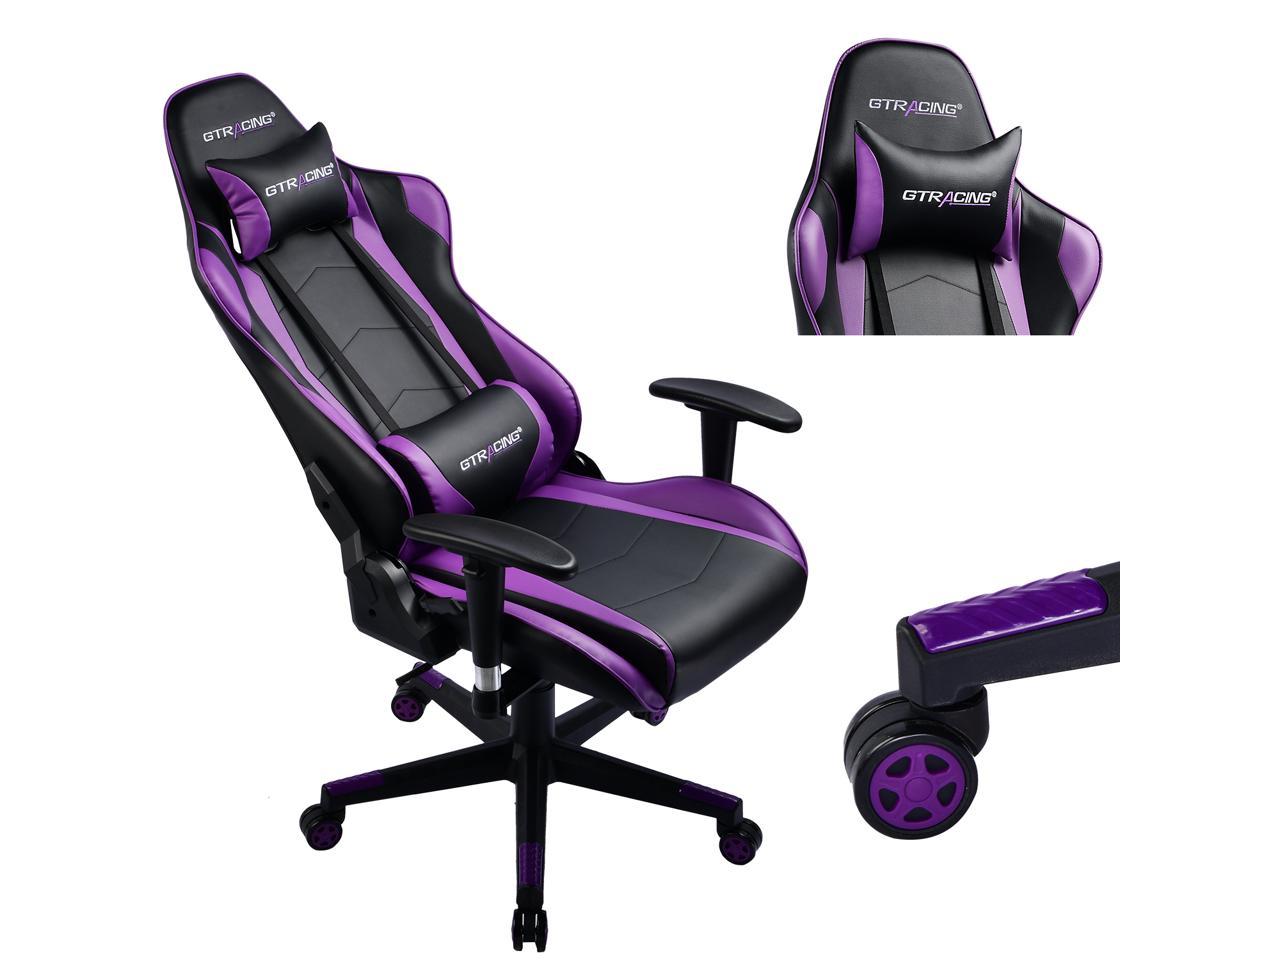  GTRACING  Gaming  Chair  Racing Office Computer Game  Chair  